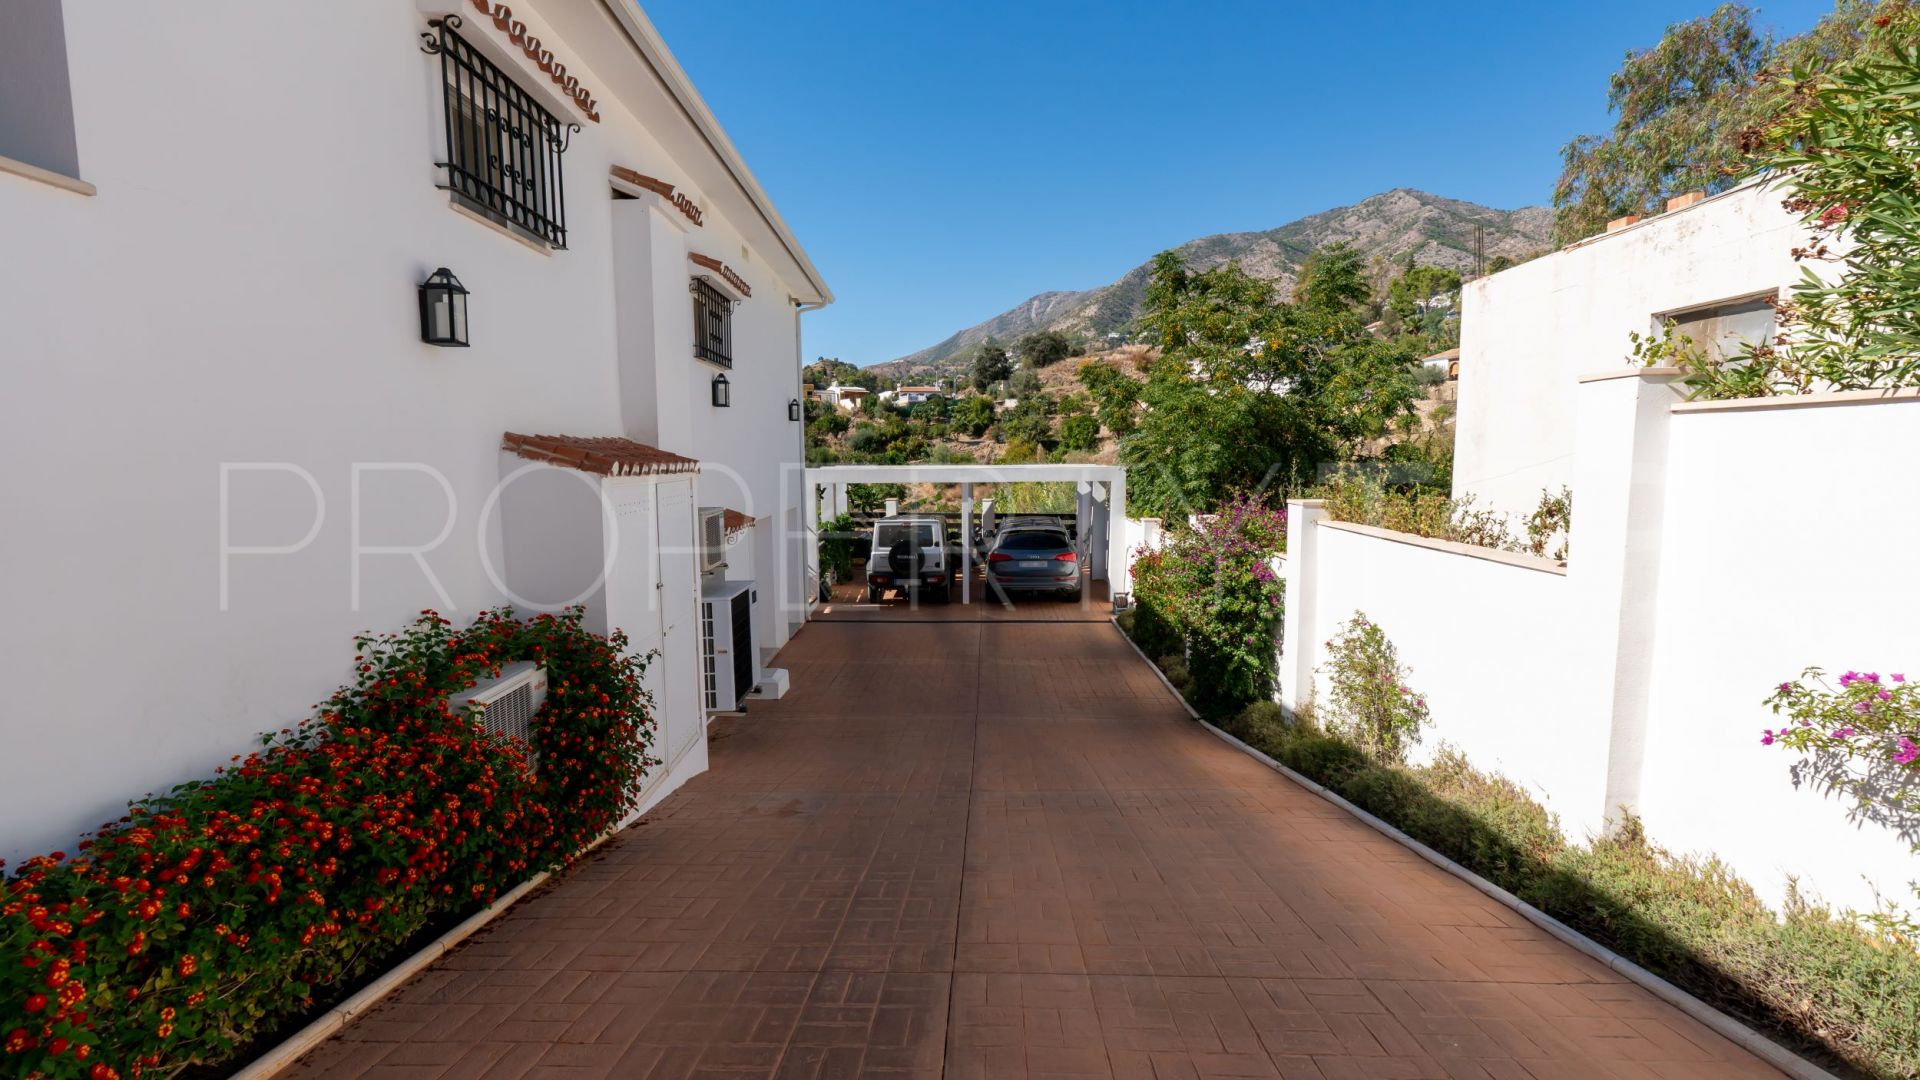 For sale villa in Doña Pilar with 4 bedrooms